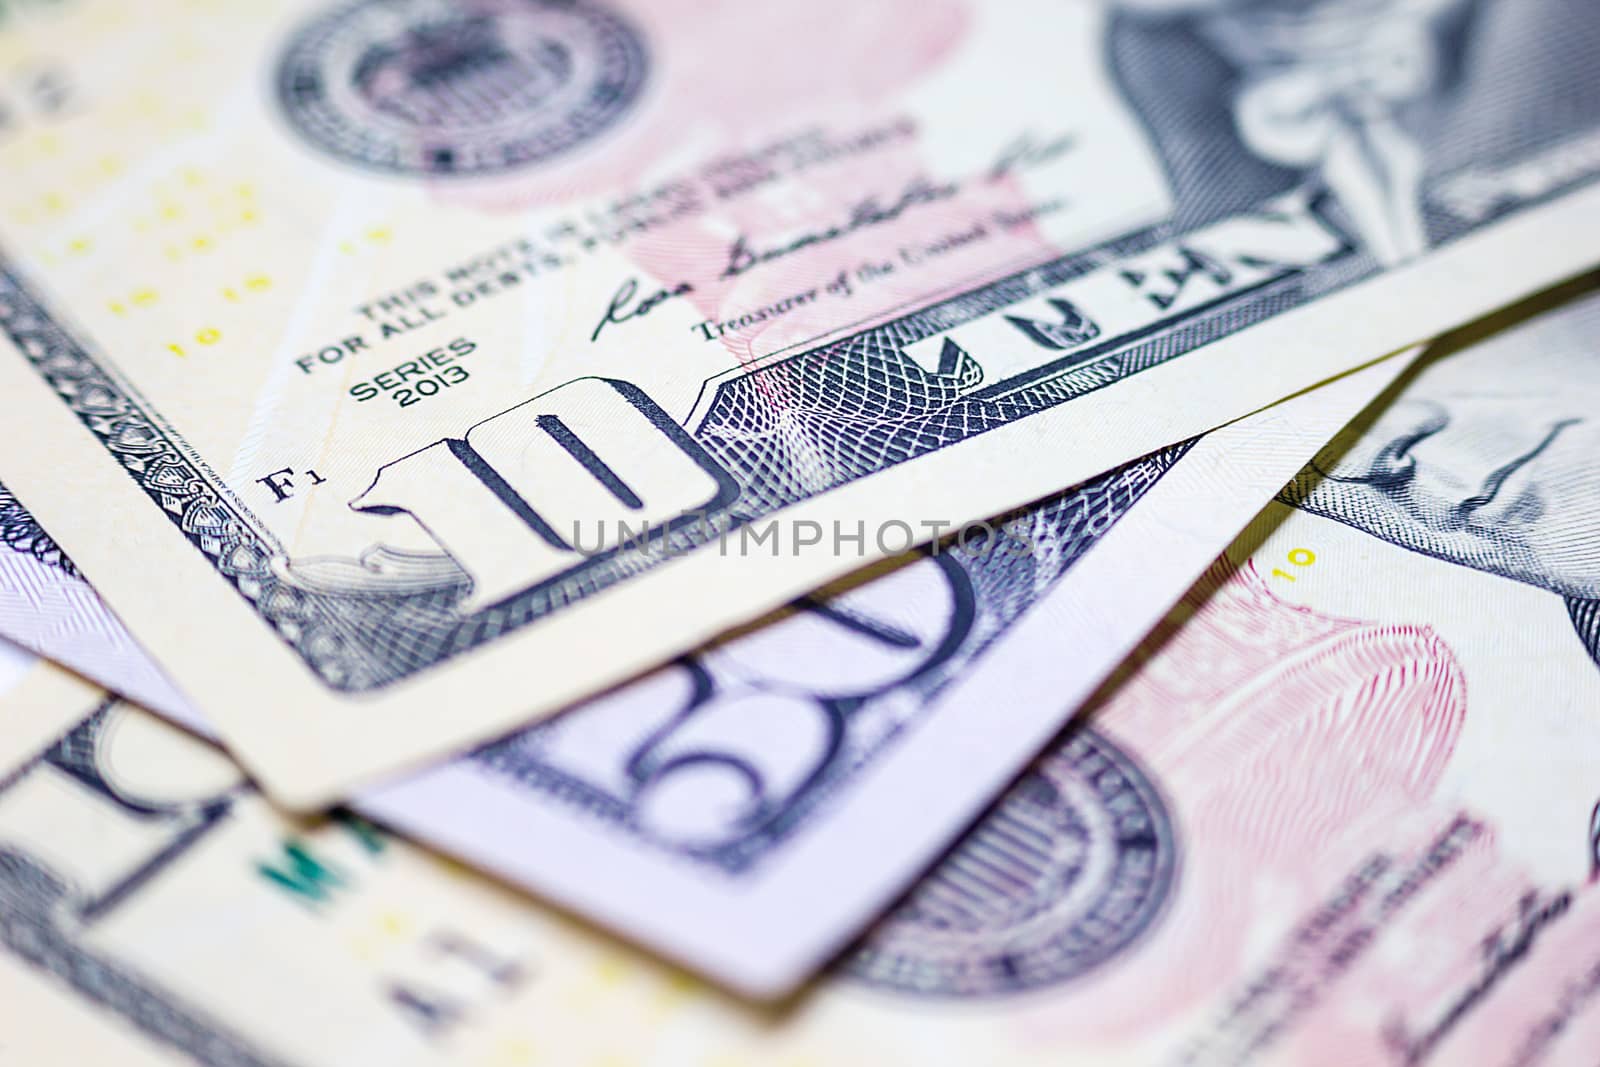 Close-up Dollars, American Dollars Cash Money, Dollar Banknotes, Business and Finance Concepts.